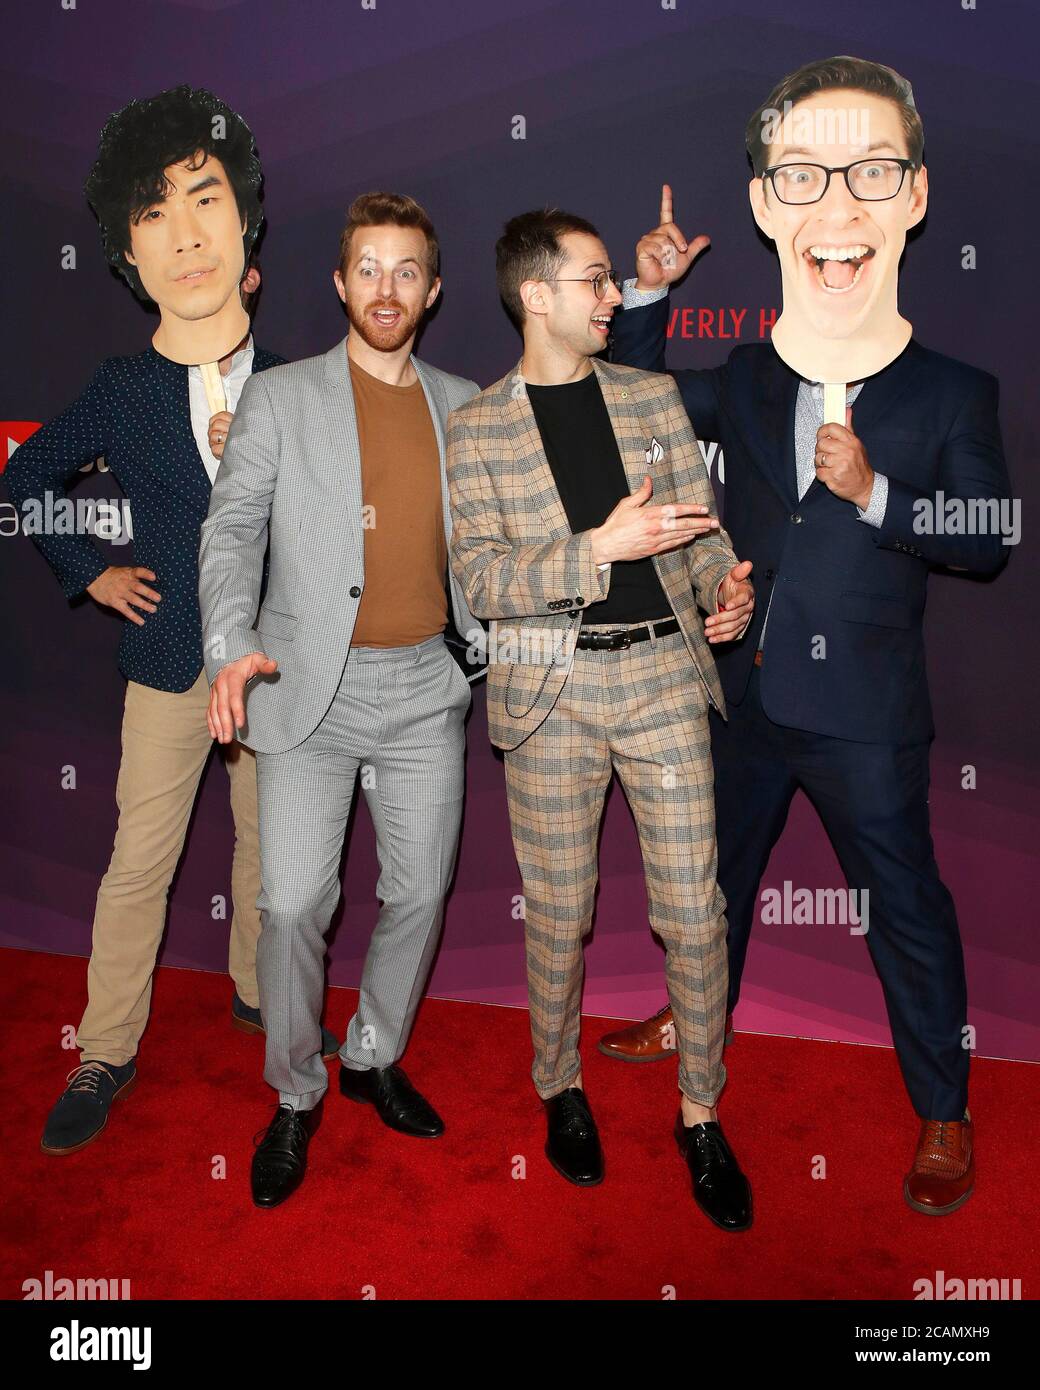 LOS ANGELES - DEC 13:  Eugene Lee Yang, Ned Fulmer, Zach Kornfeld, Keith Habersberger at the 9th Annual Streamy Awards at the Beverly Hilton Hotel on December 13, 2017 in Beverly Hills, CA Stock Photo